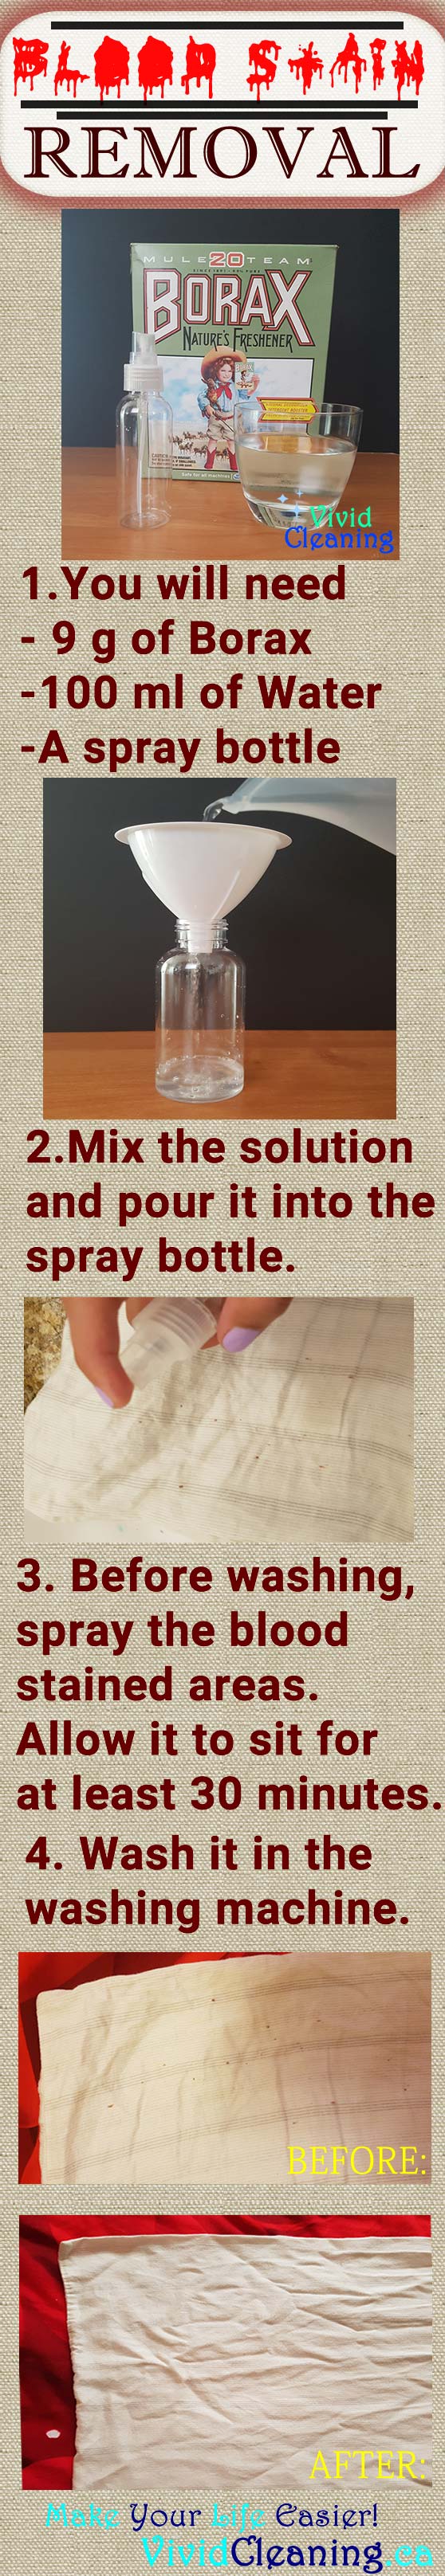 You will need borax, water and a spray bottle. Start by mixing 9g of borax in 100 ml of water. Pour the solution into the spray bottle. Next, simply spray the blood stains on your sheets with the spray. They should become lighter from this initial prespray. Allow the solution to sit for a minimum of 30 minutes or longer.